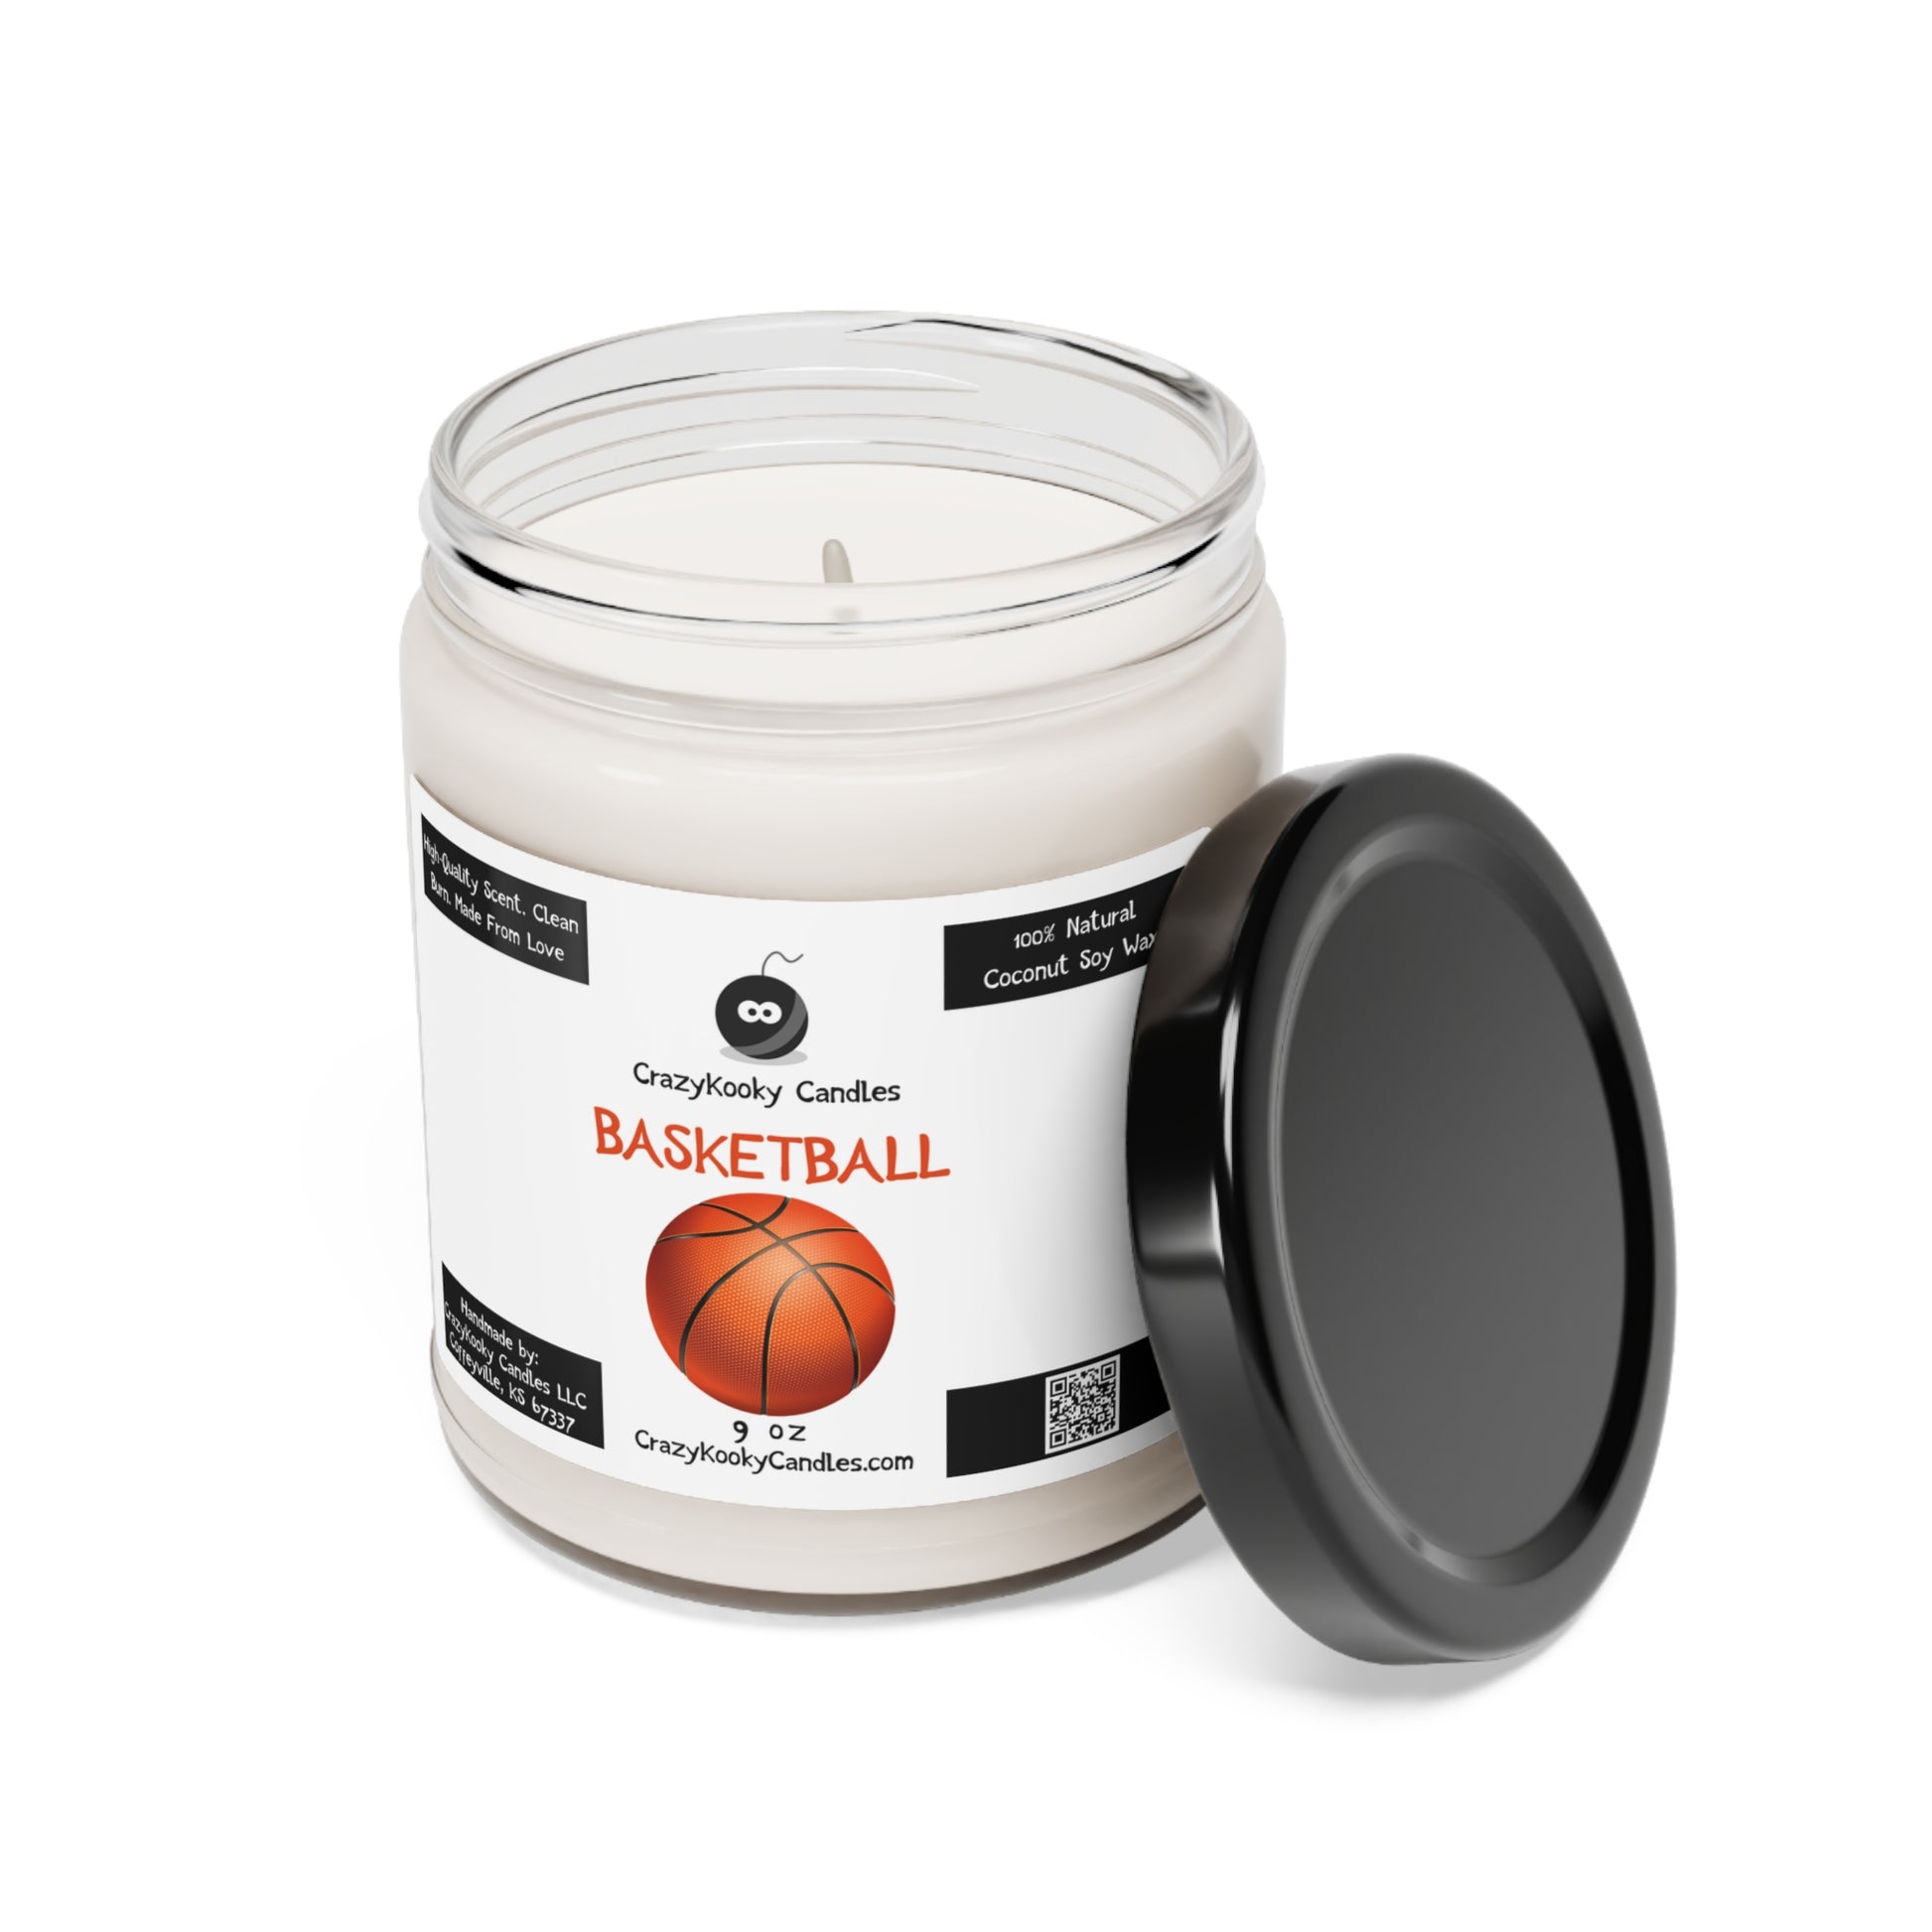 BASKETBALL - Funny Candle, Scented Coconut Soy Candle, 9oz - CrazyKooky Candles LLC